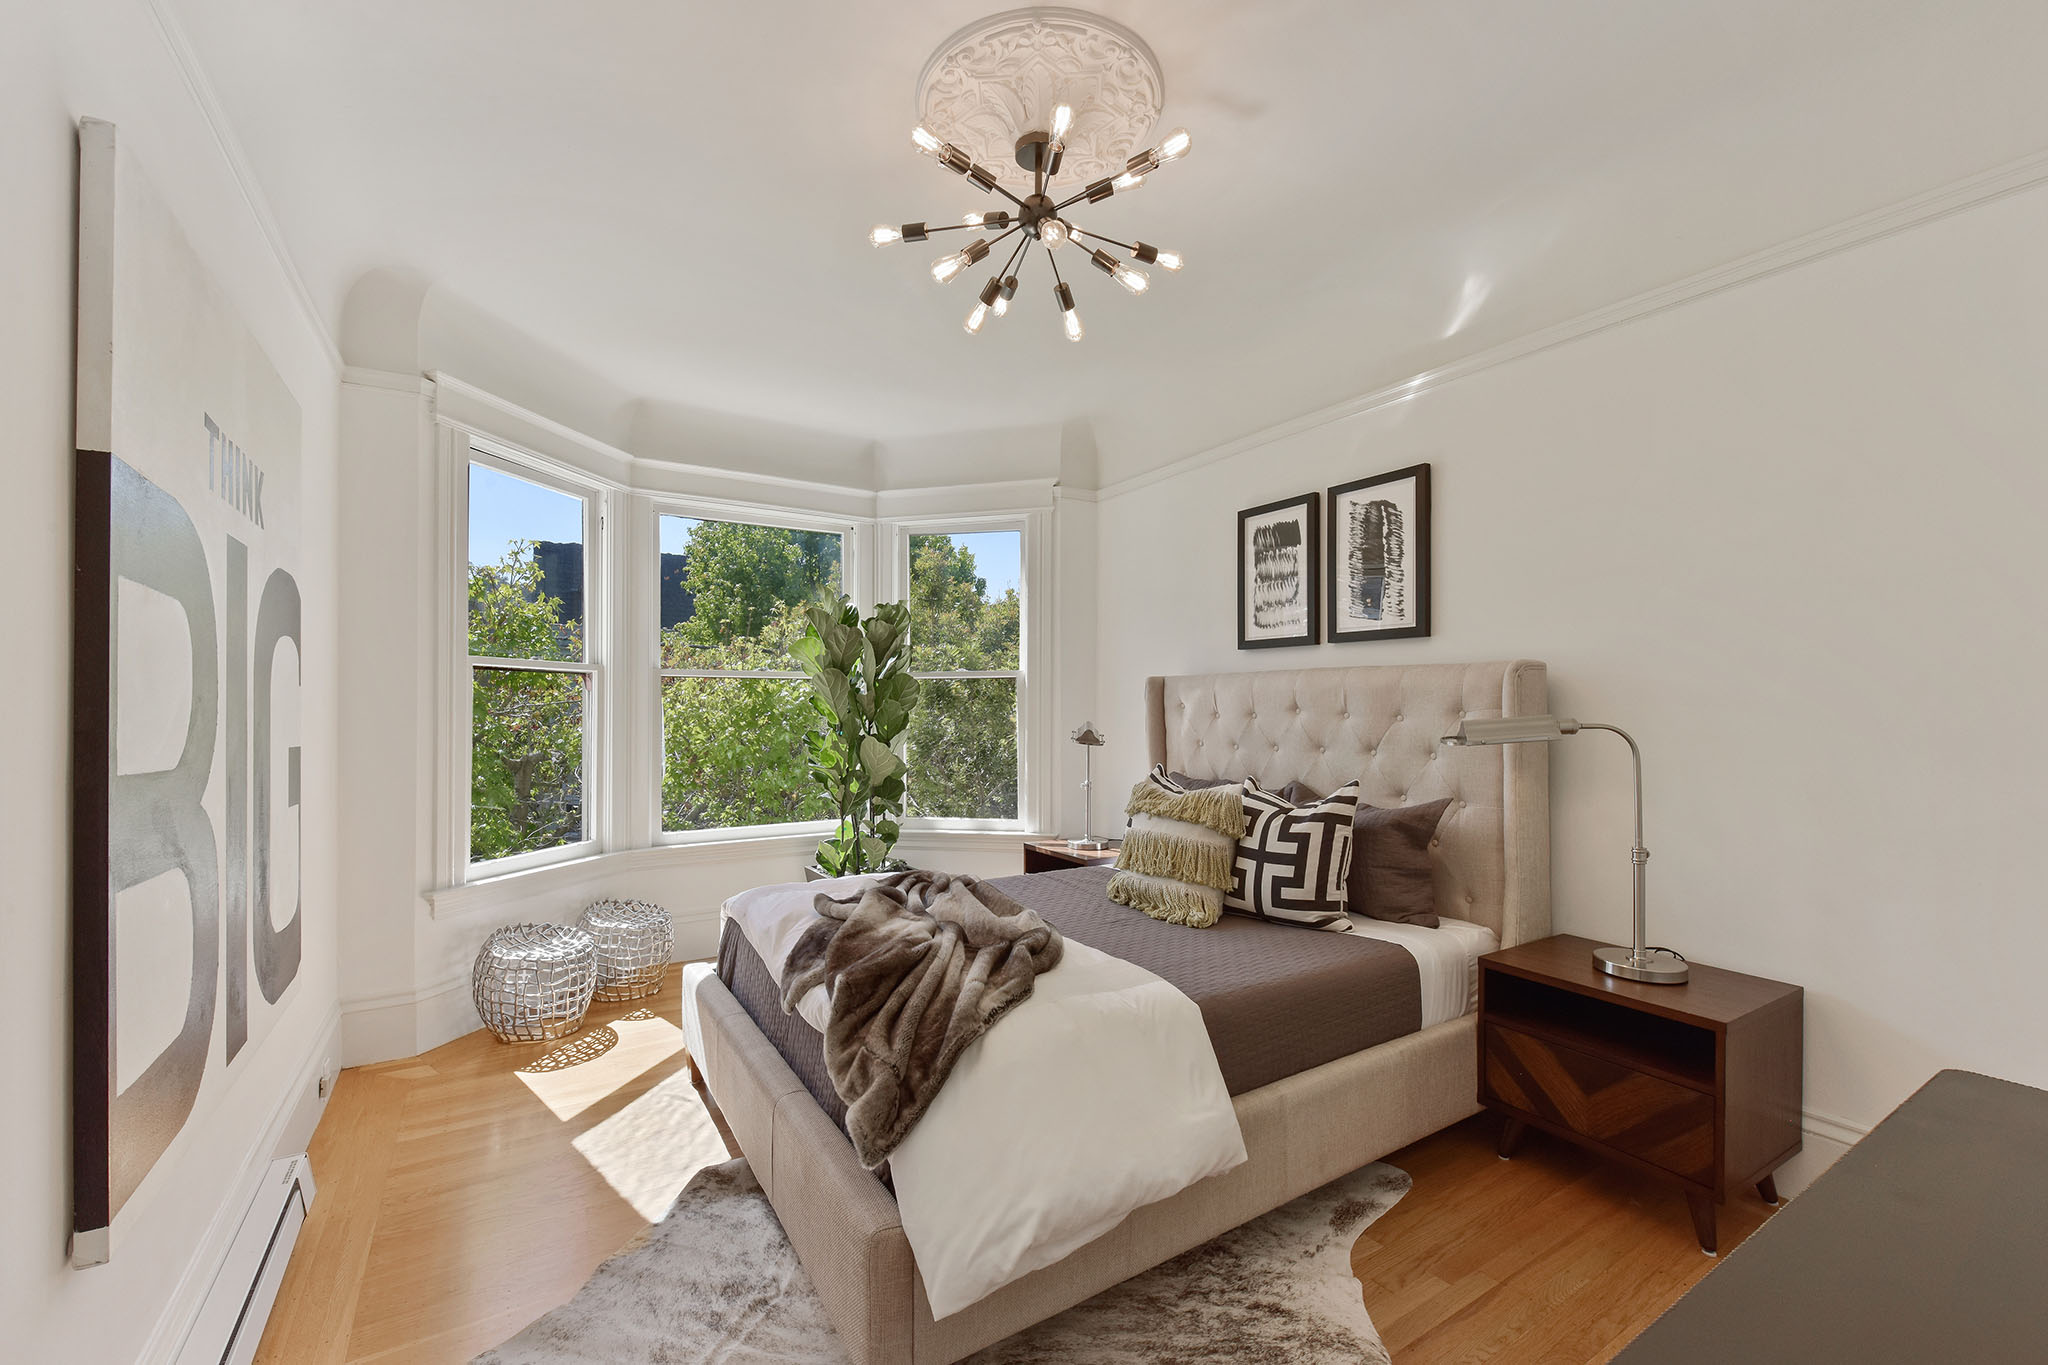 Property Photo: Bedroom, featuring wood floors and bay windows